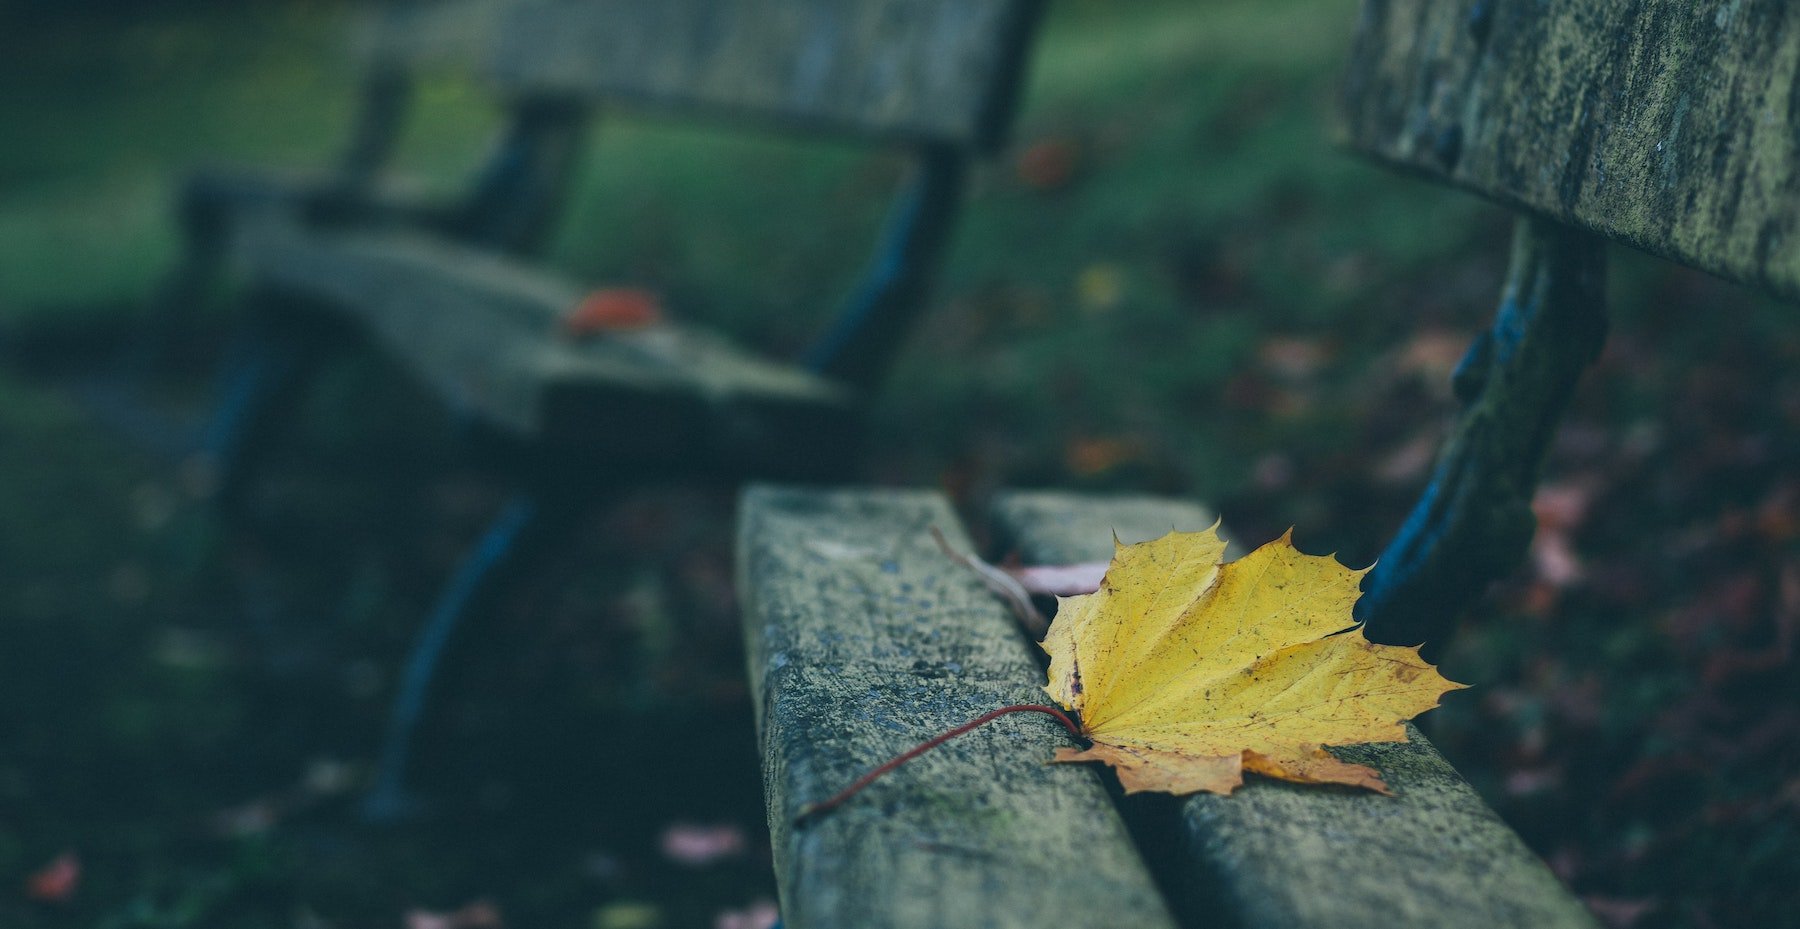 memorial bench with a yellow leaf on it